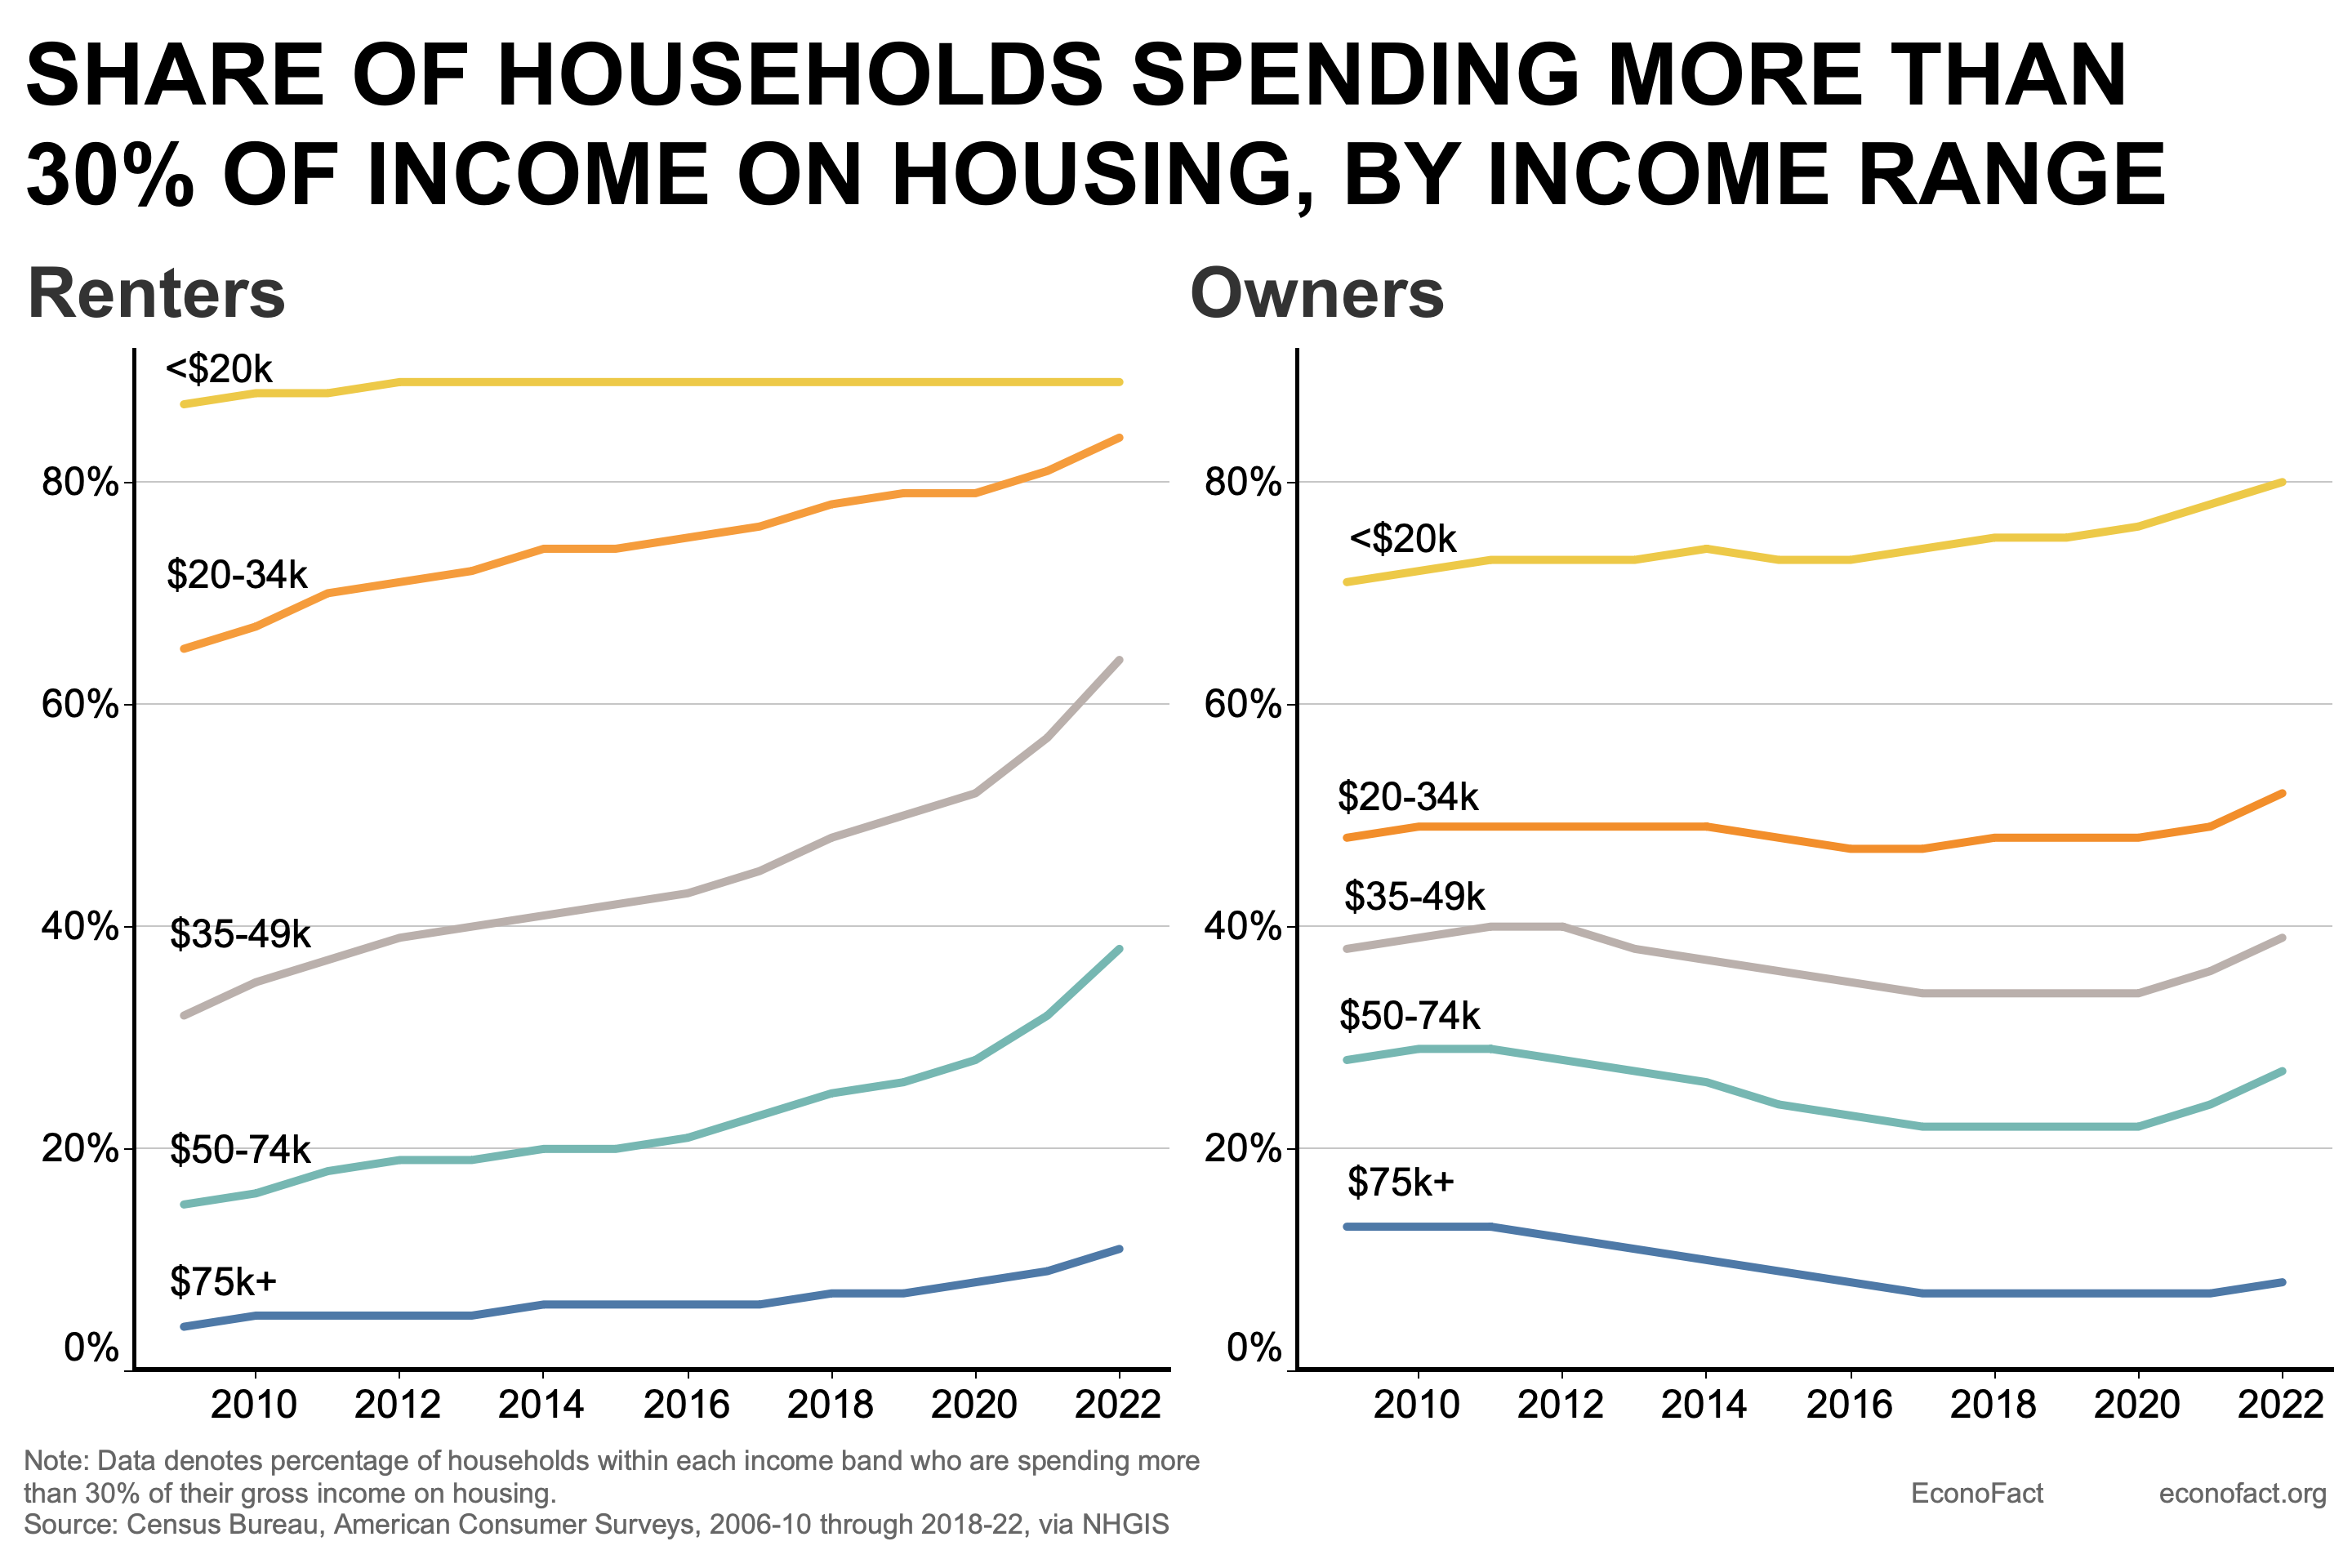 Share of Households Spending More Than 30% of Income on Housing, by Income Range.